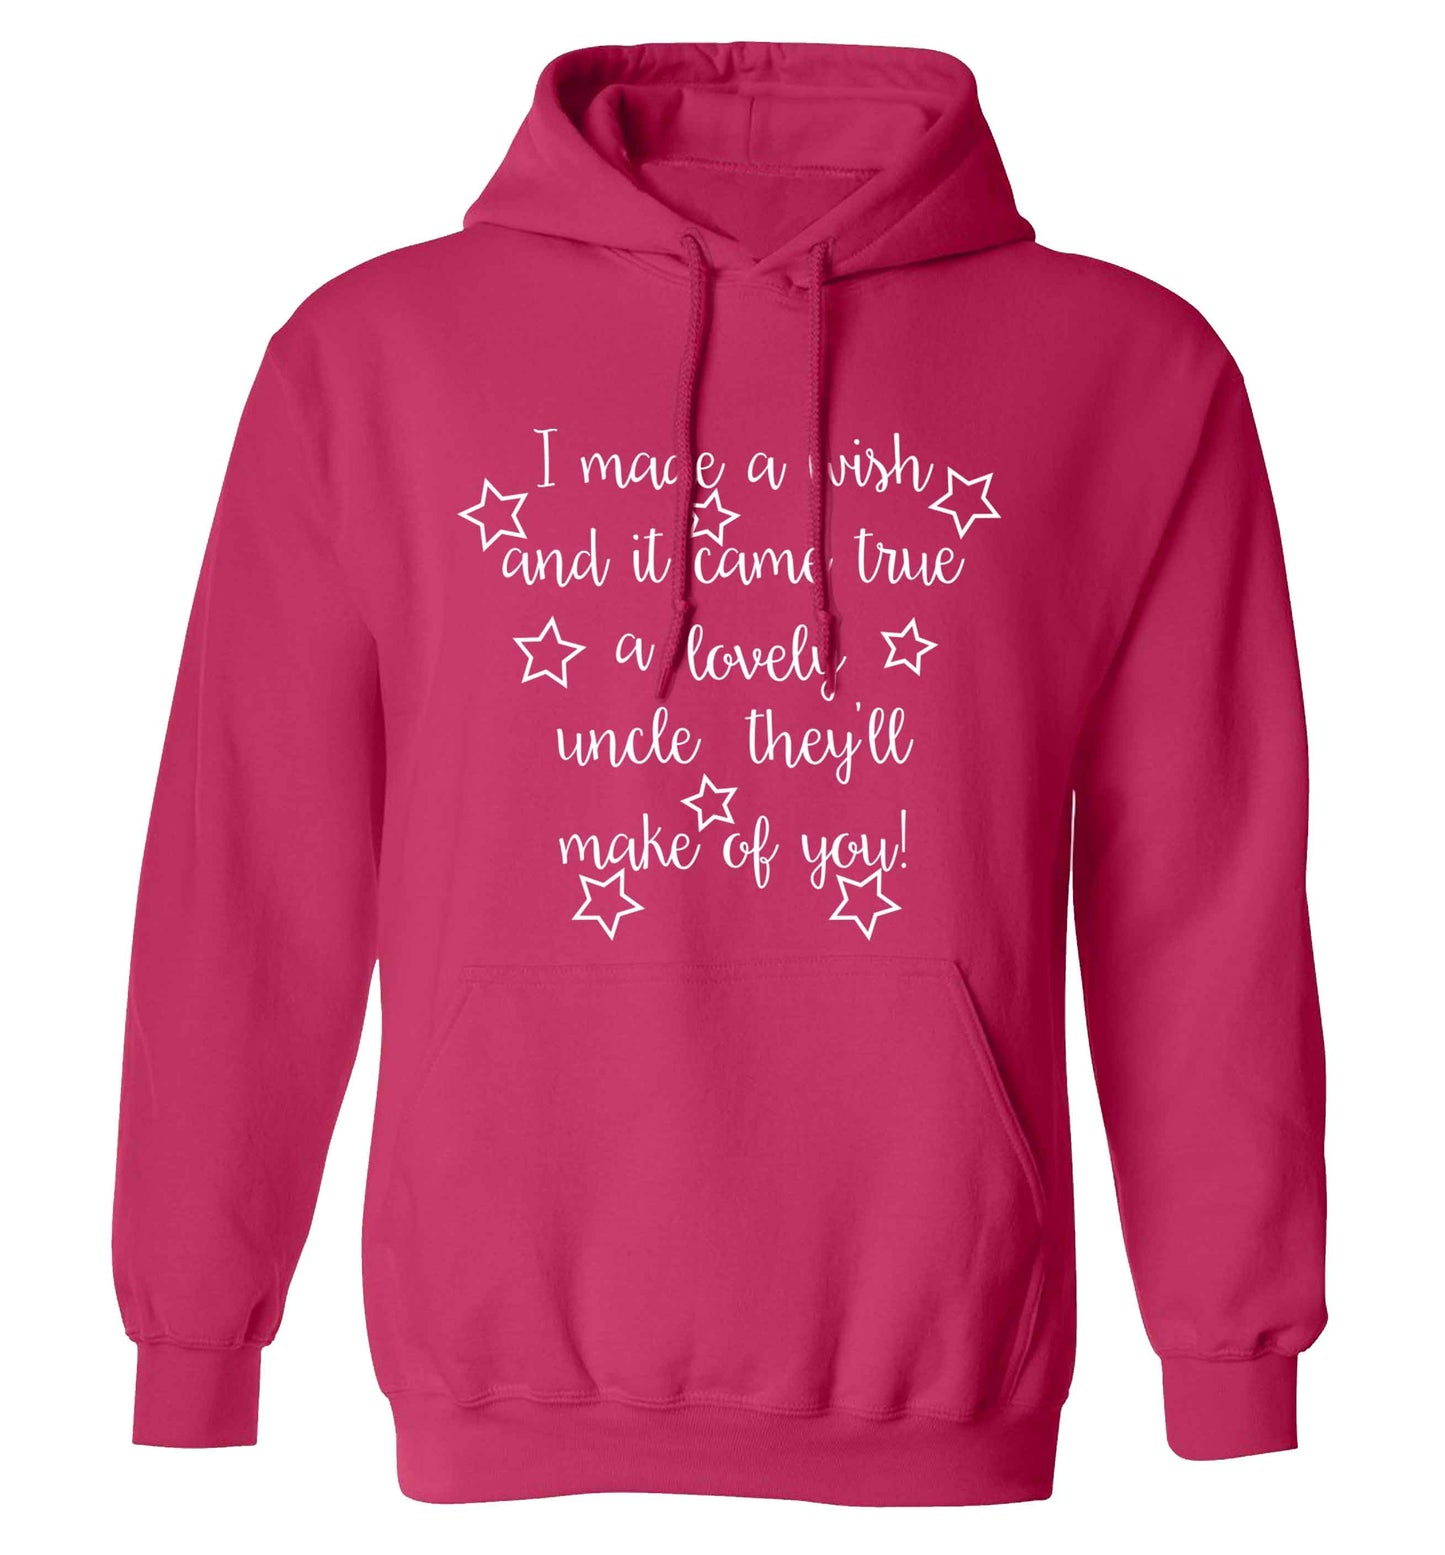 I made a wish and it came true a lovely uncle they'll make of you! adults unisex pink hoodie 2XL